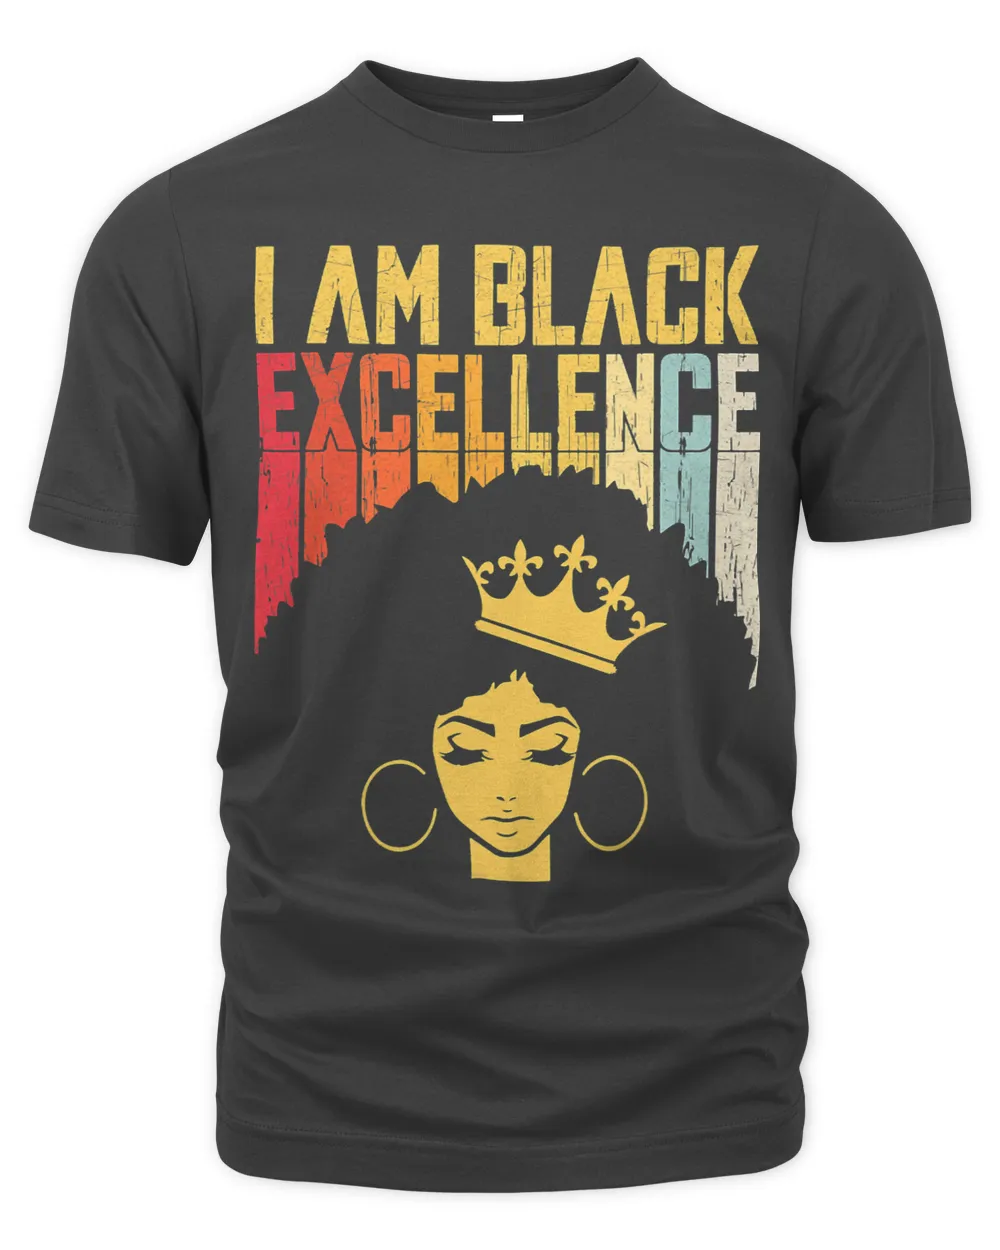 Retro Vintage Black Excellence African Pride History Month